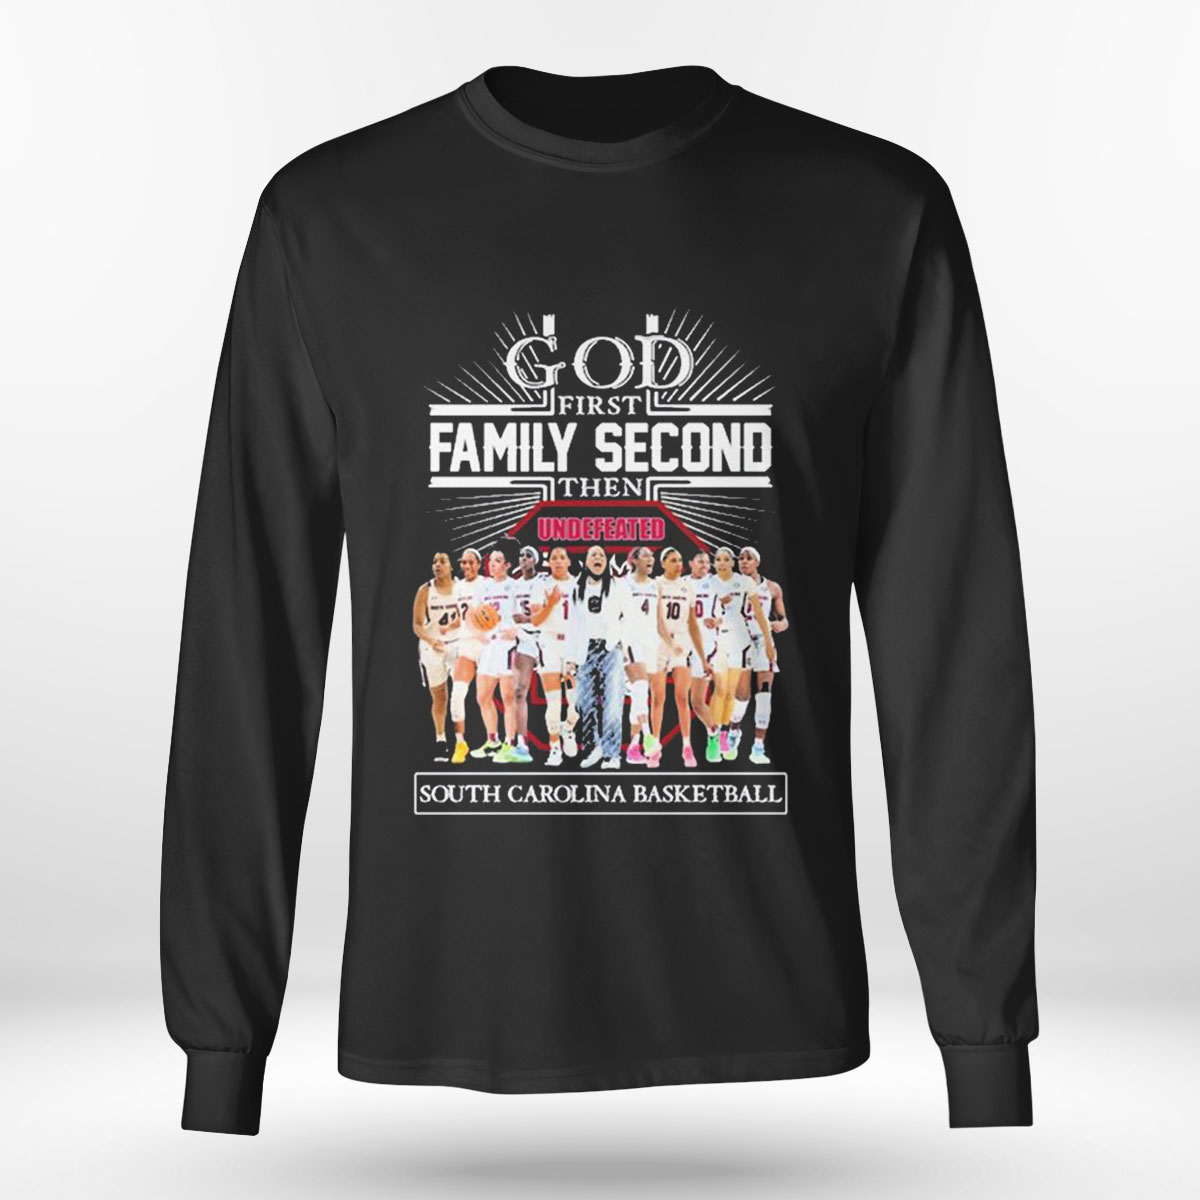 God First Family Second Then Undefeated South Carolina Basketball T-shirt